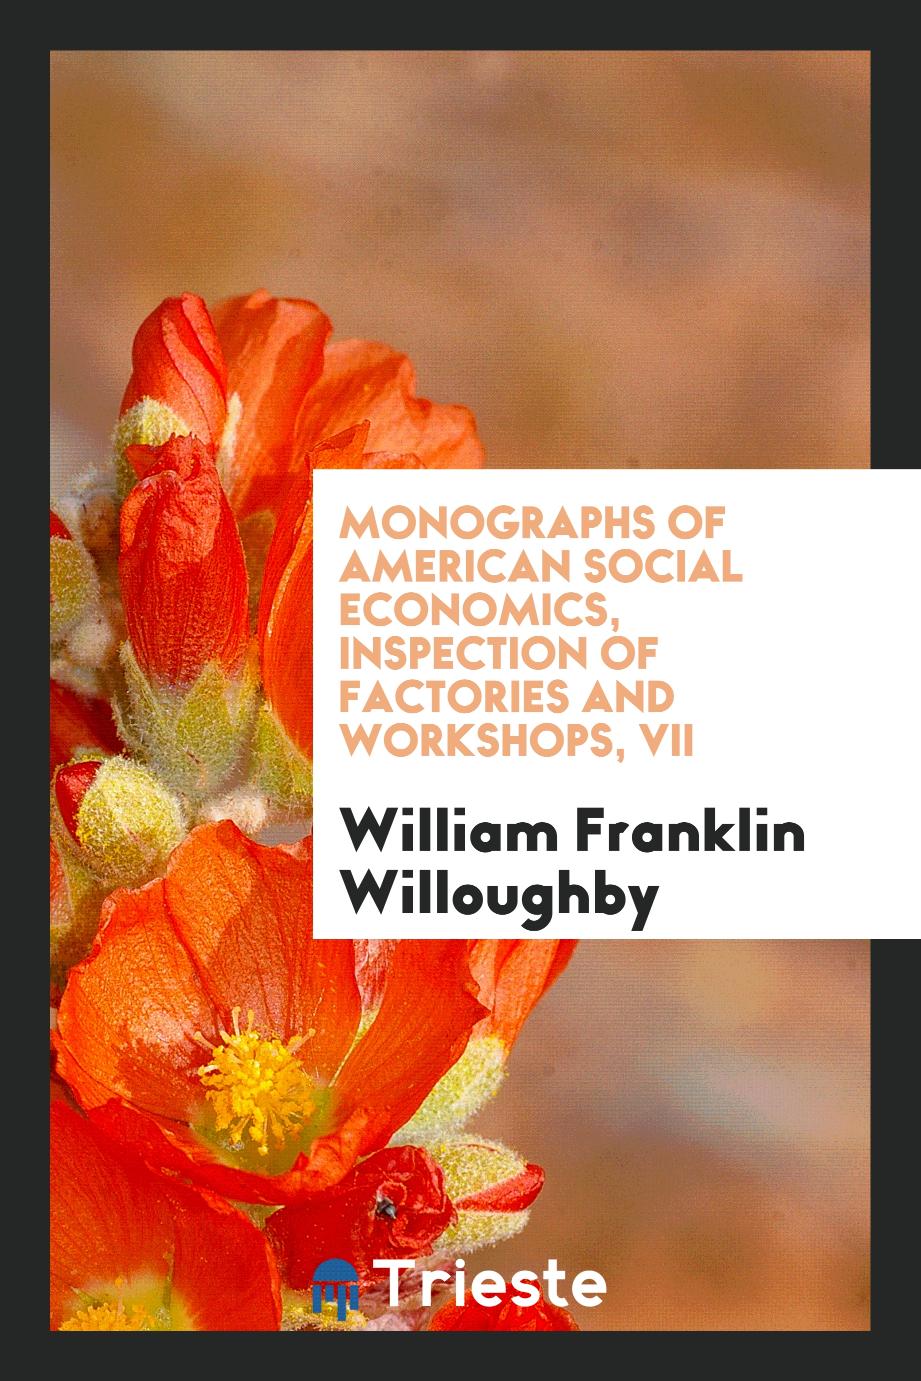 Monographs of American social economics, Inspection of factories and workshops, VII